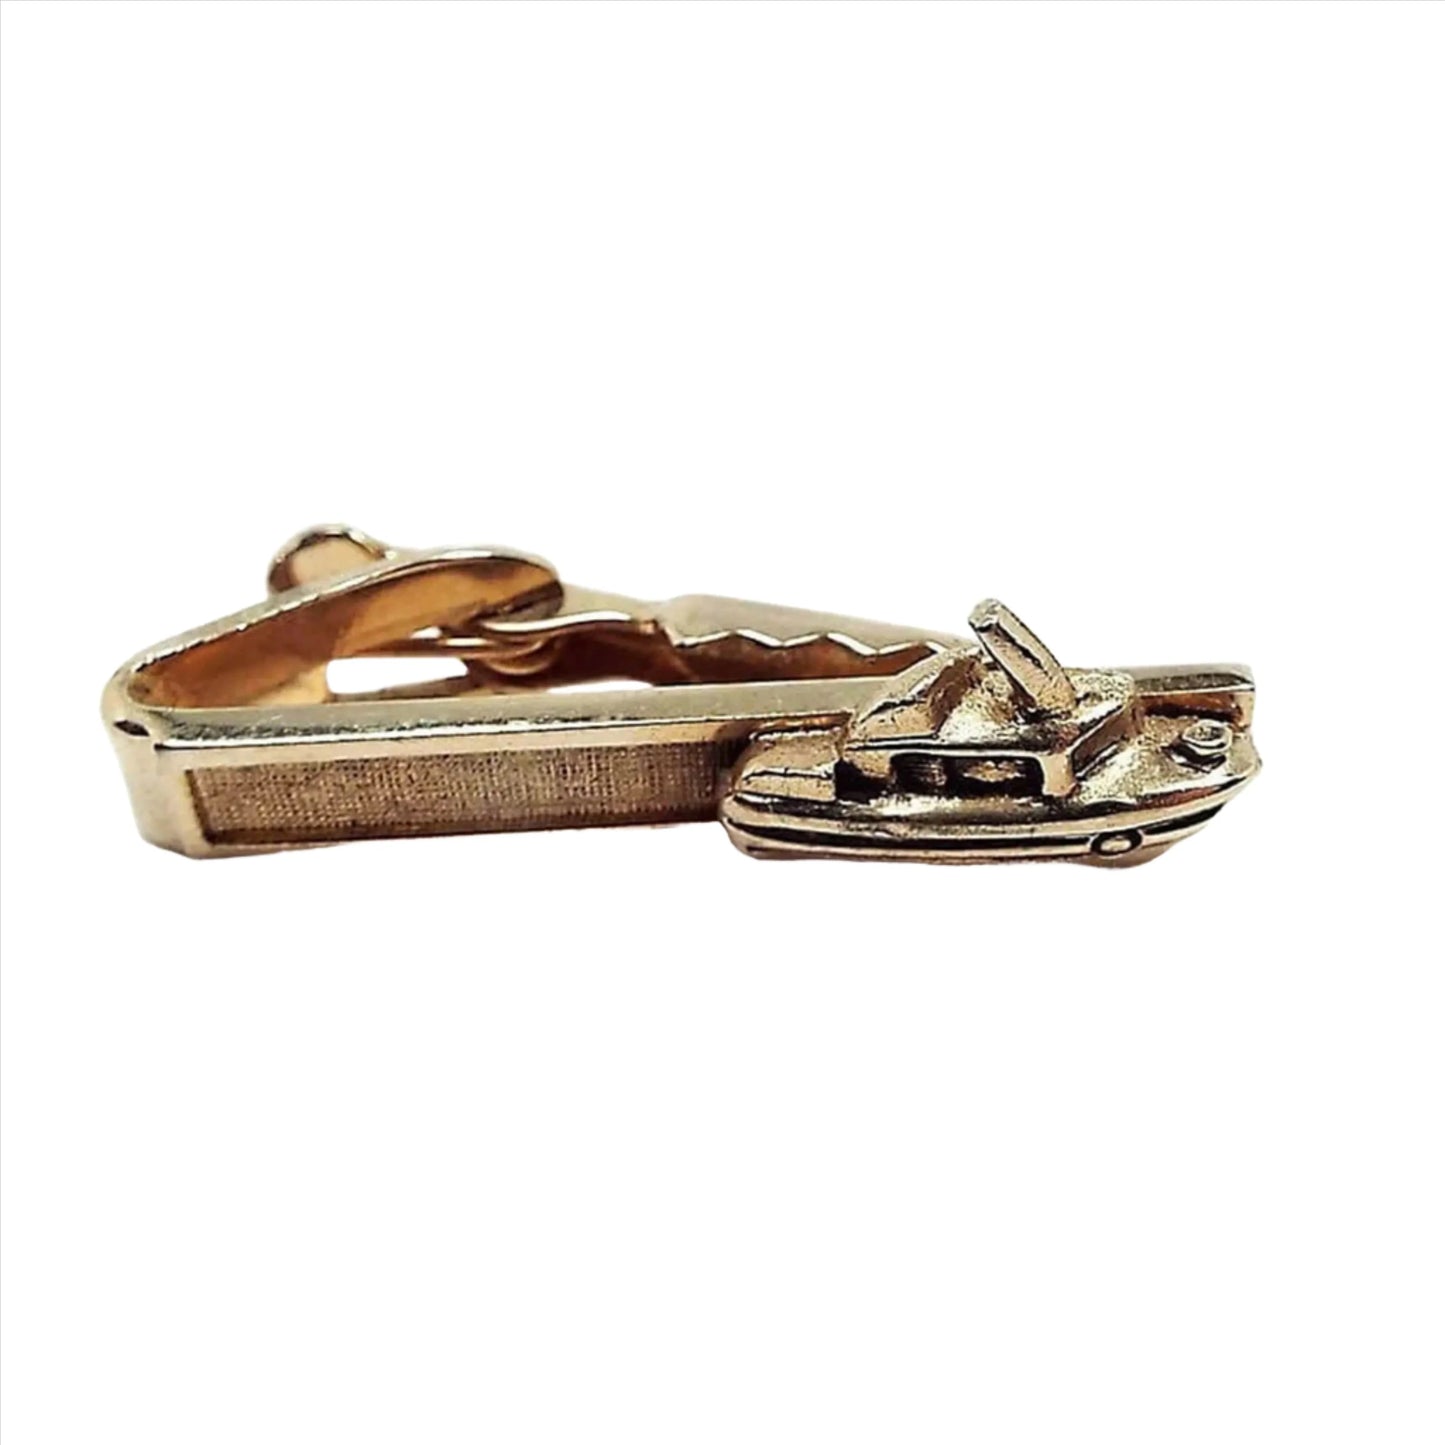 Front view of the Mid Century vintage boat tie clip by Shields. It is gold tone in color. The front is textured and has a 3D style yacht on the end.